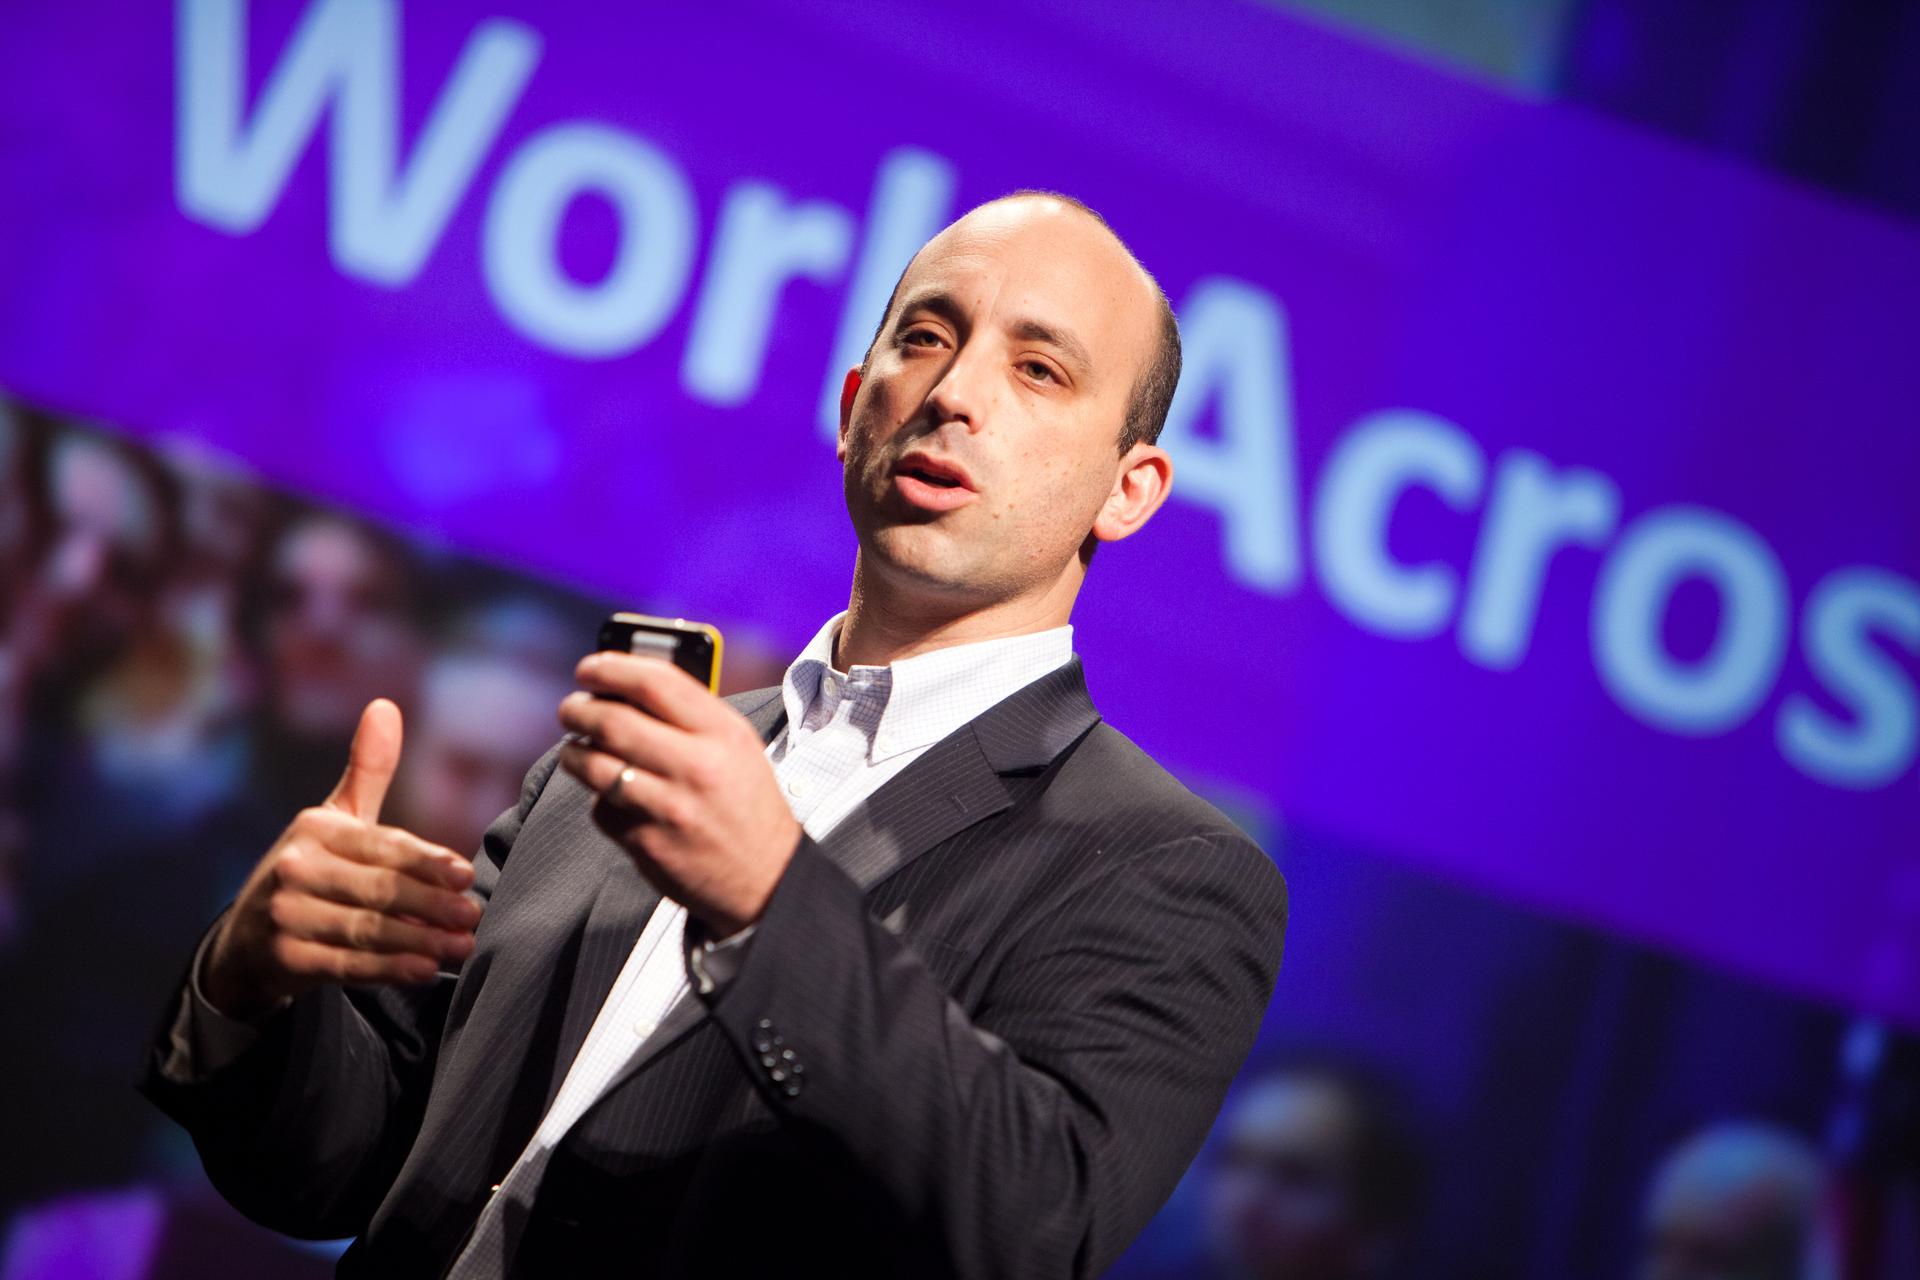 Jonathan Greenblatt discusses successful cross-sector models for social progress at PopTech conference in Camden Maine.